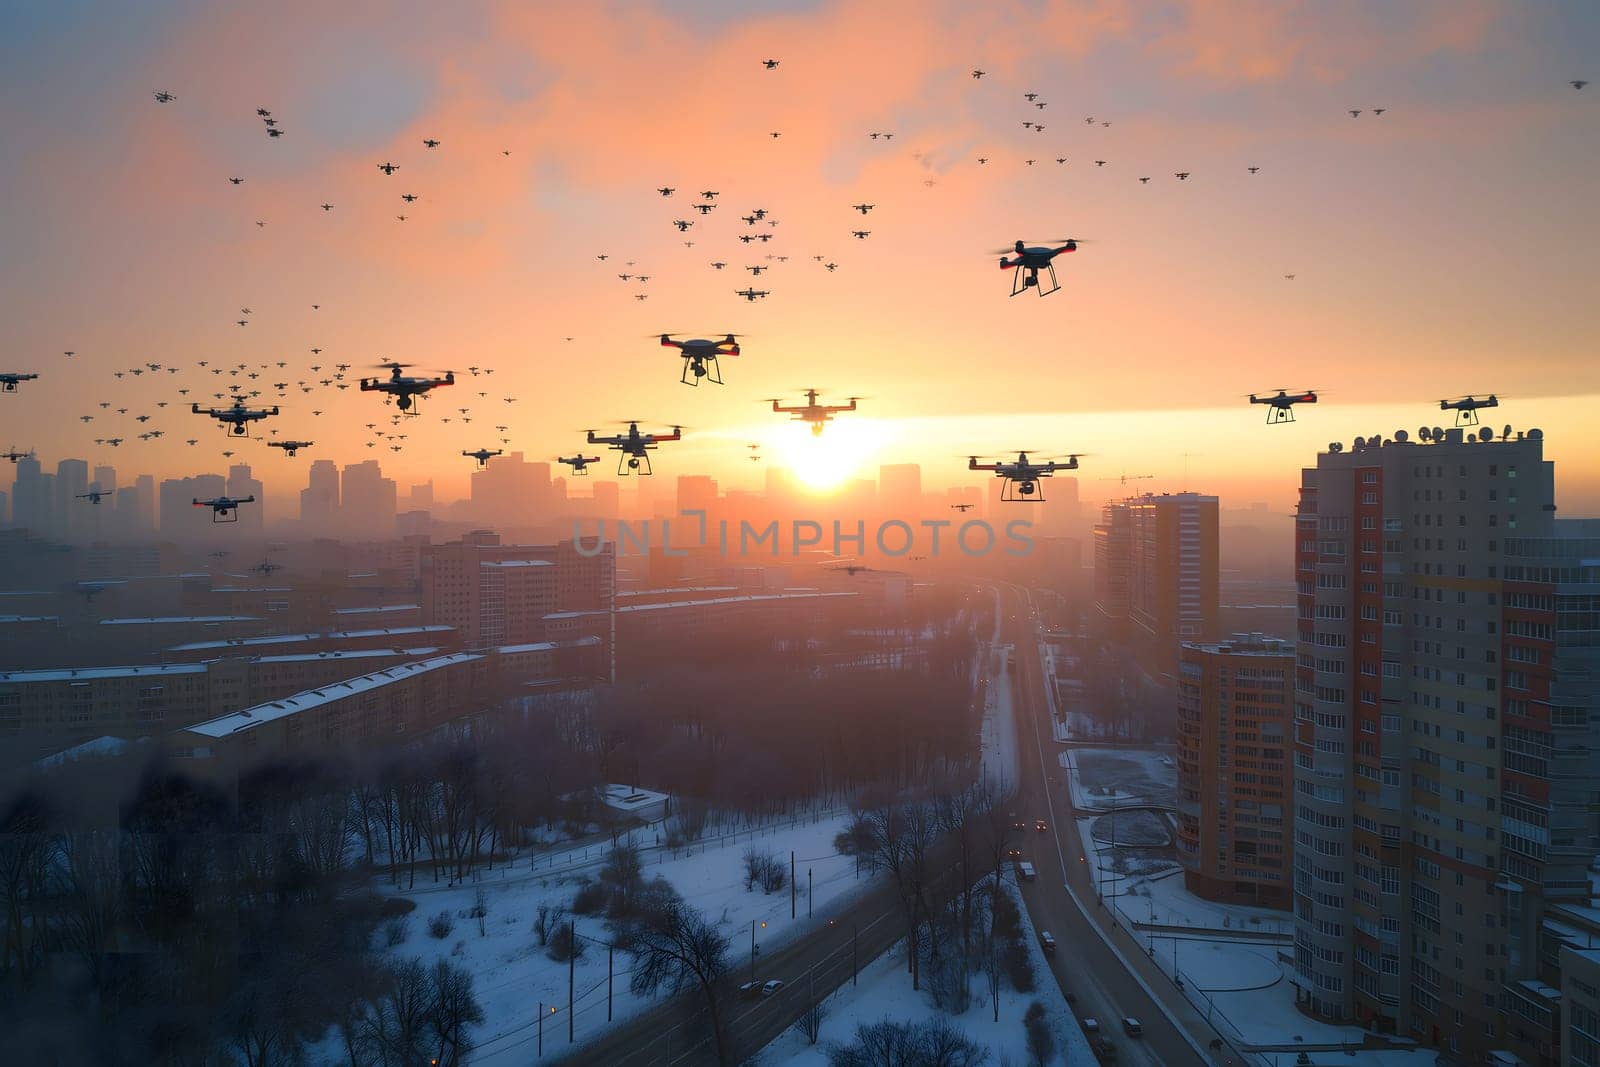 swarm of drones over city at winter sunset or sunrise by z1b